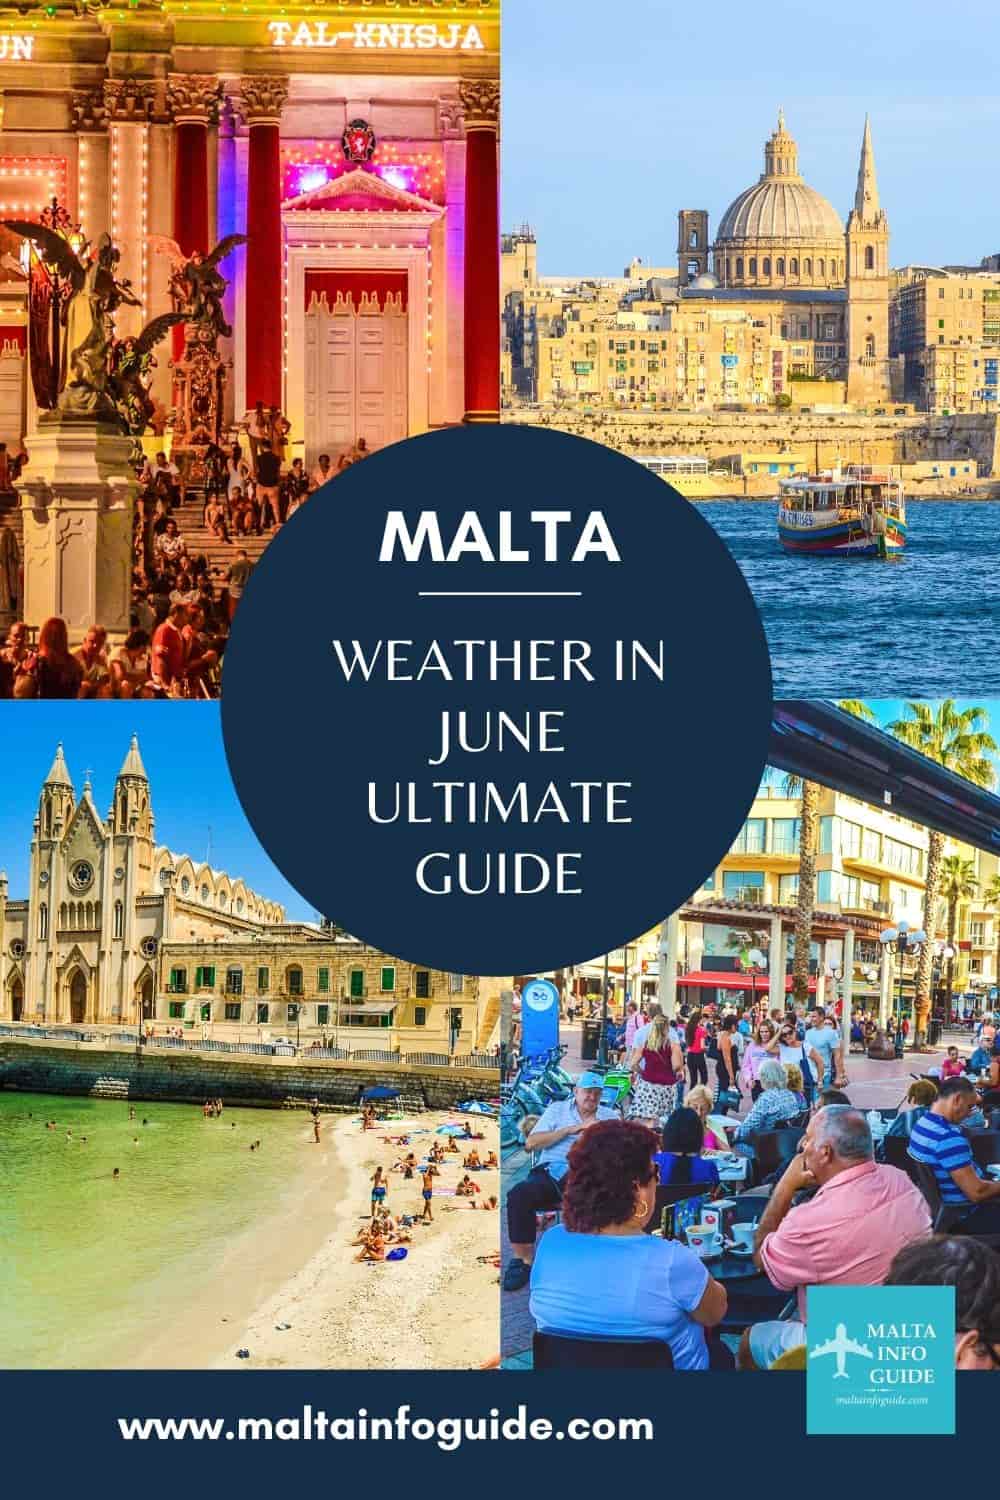 It is now dry and hot but still, it will be hotter in the coming months. View the weather in Malta in June guide for details.